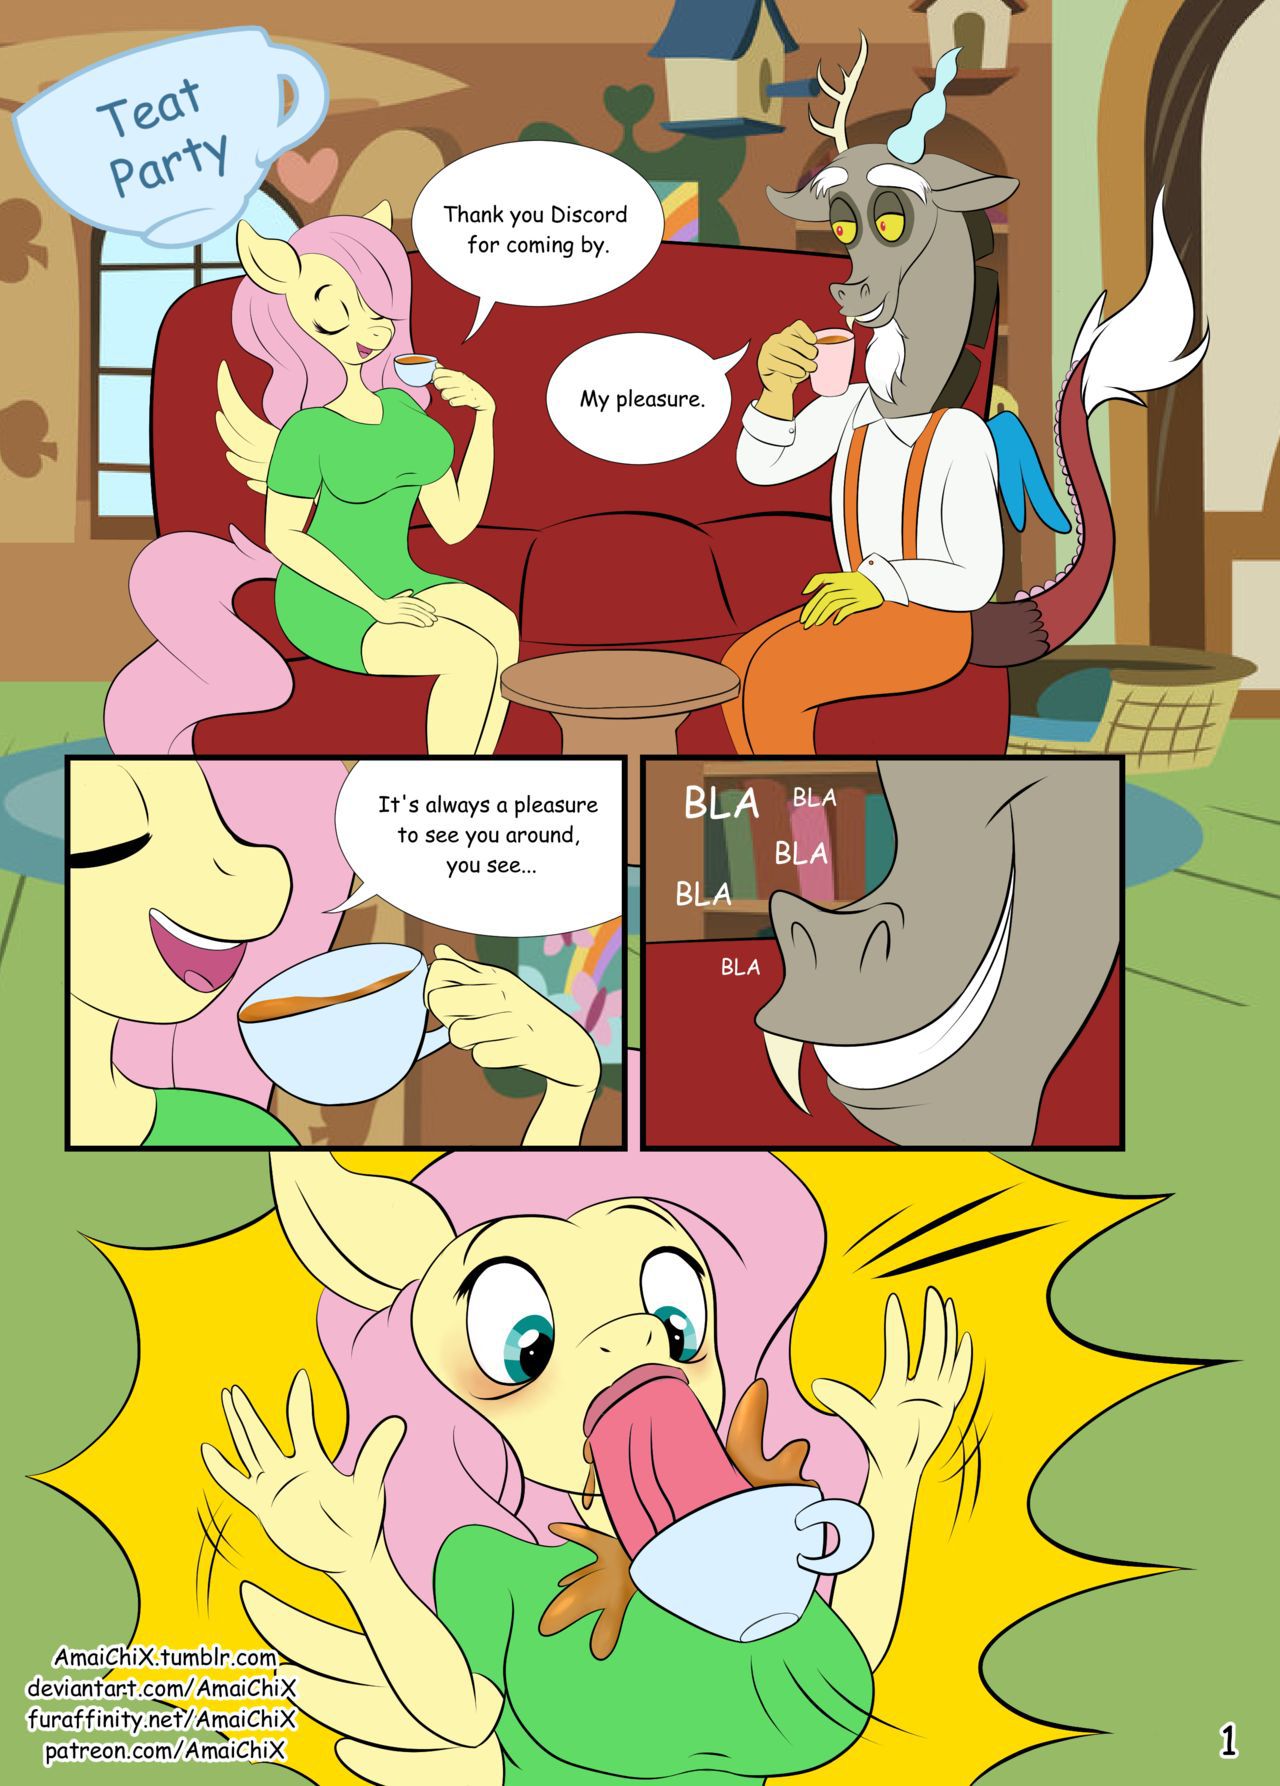 [AmaiChiX] Teat Party (My Little Pony Friendship Is Magic) [Ongoing] 2